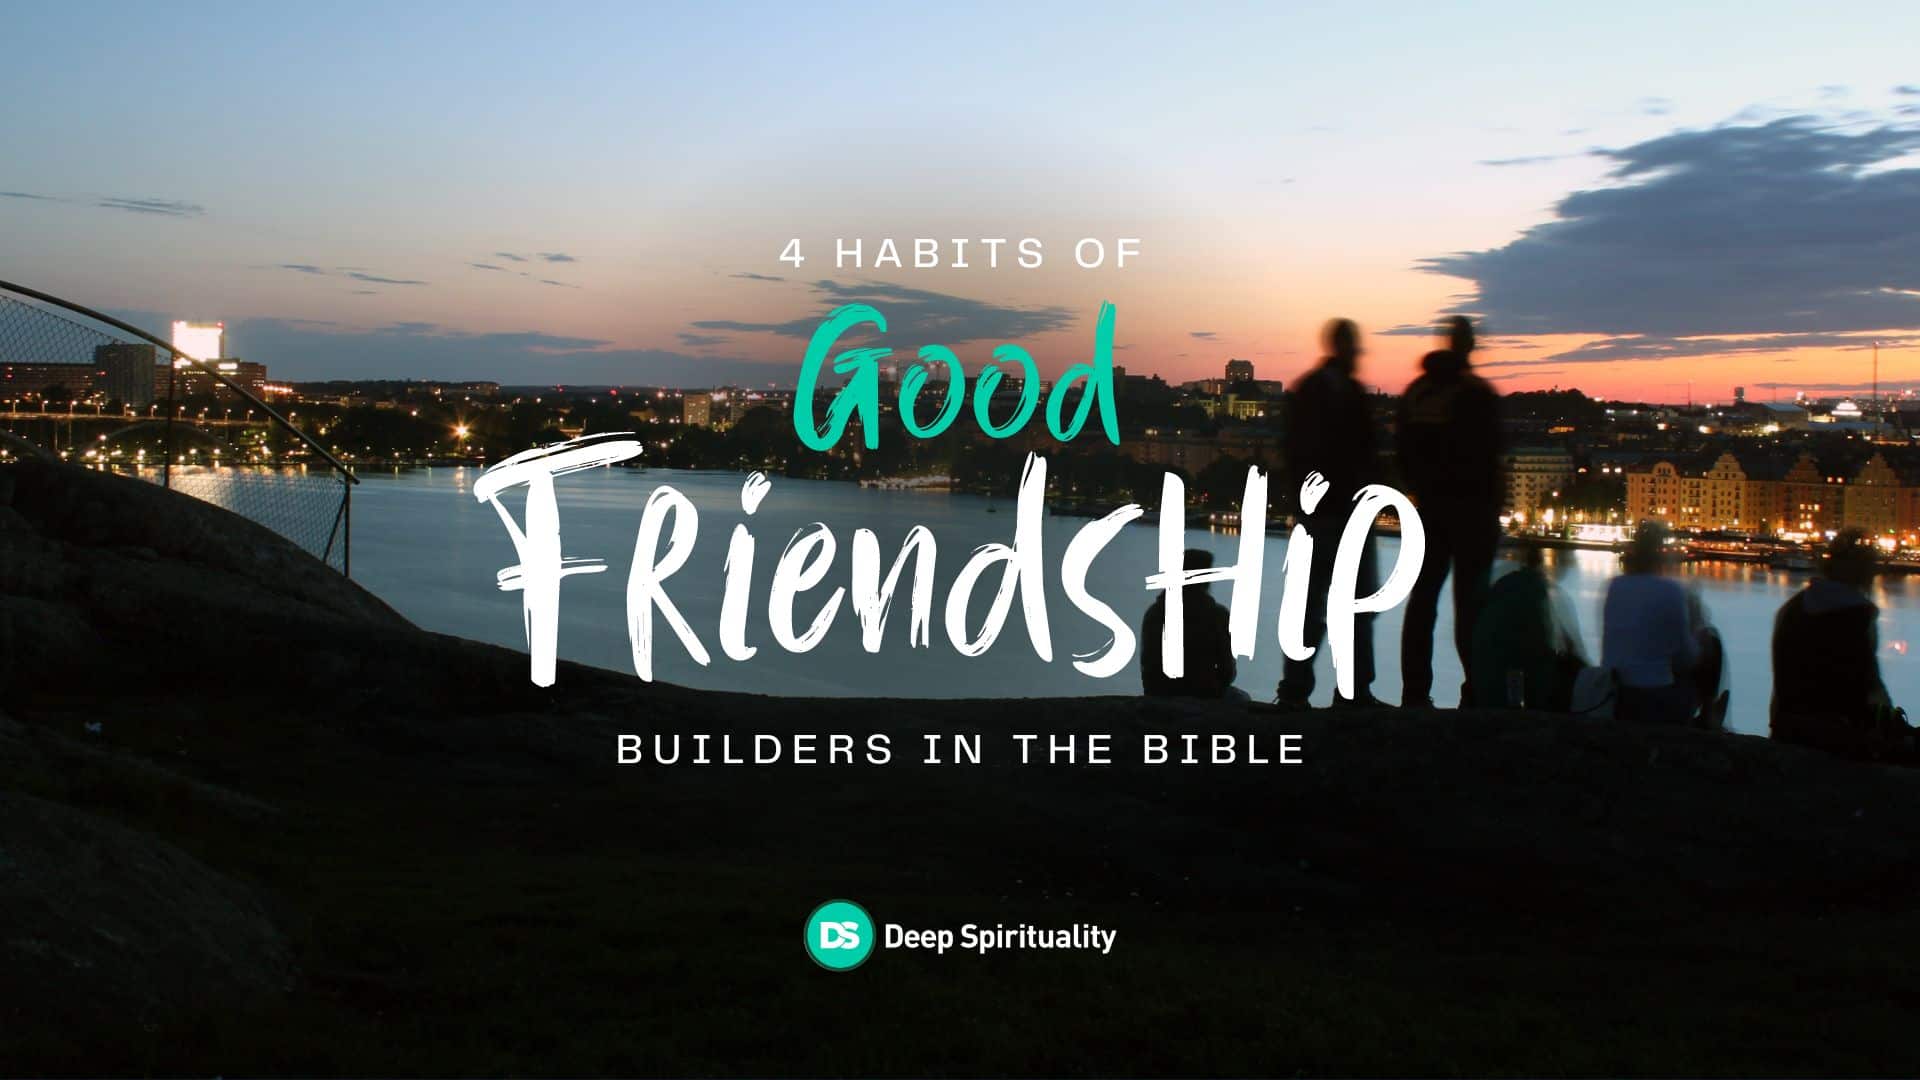 4 Habits to Build if You Want Good Friendships, According to the Bible 47